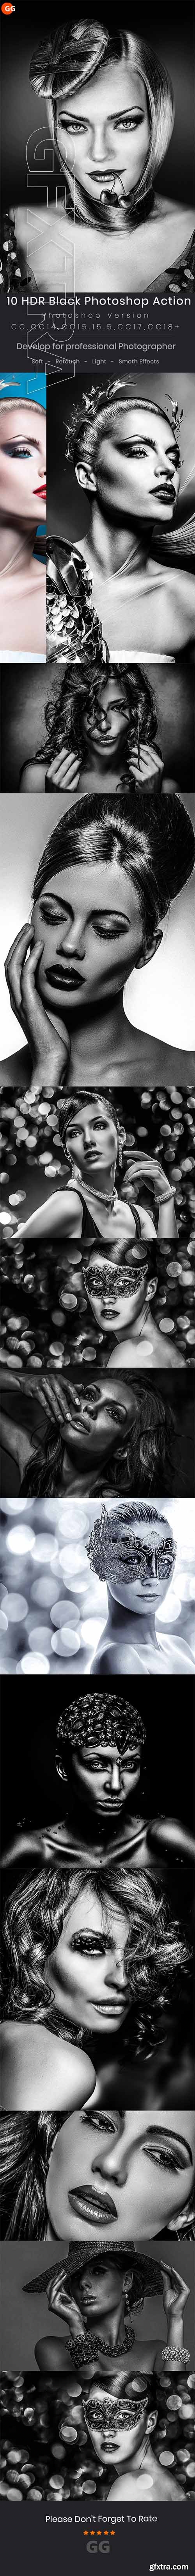 GraphicRiver - 10 HDR B&W Photoshop Action 21630694